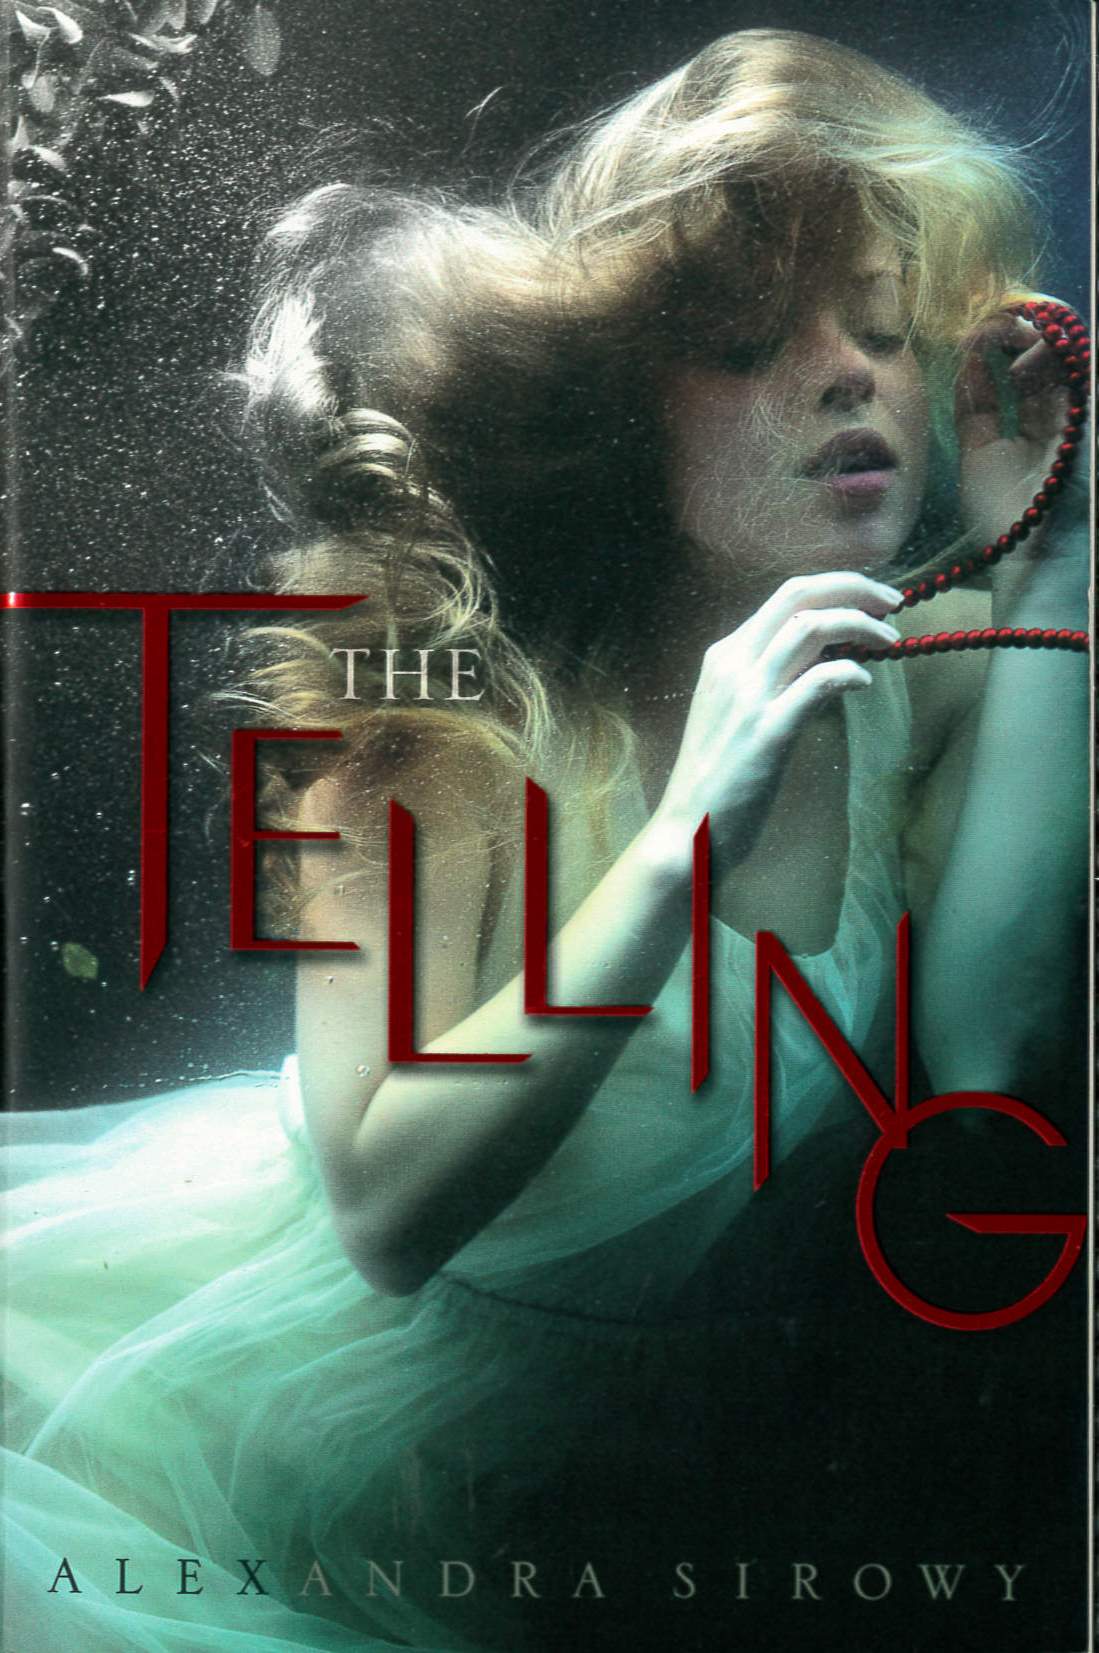 The telling /